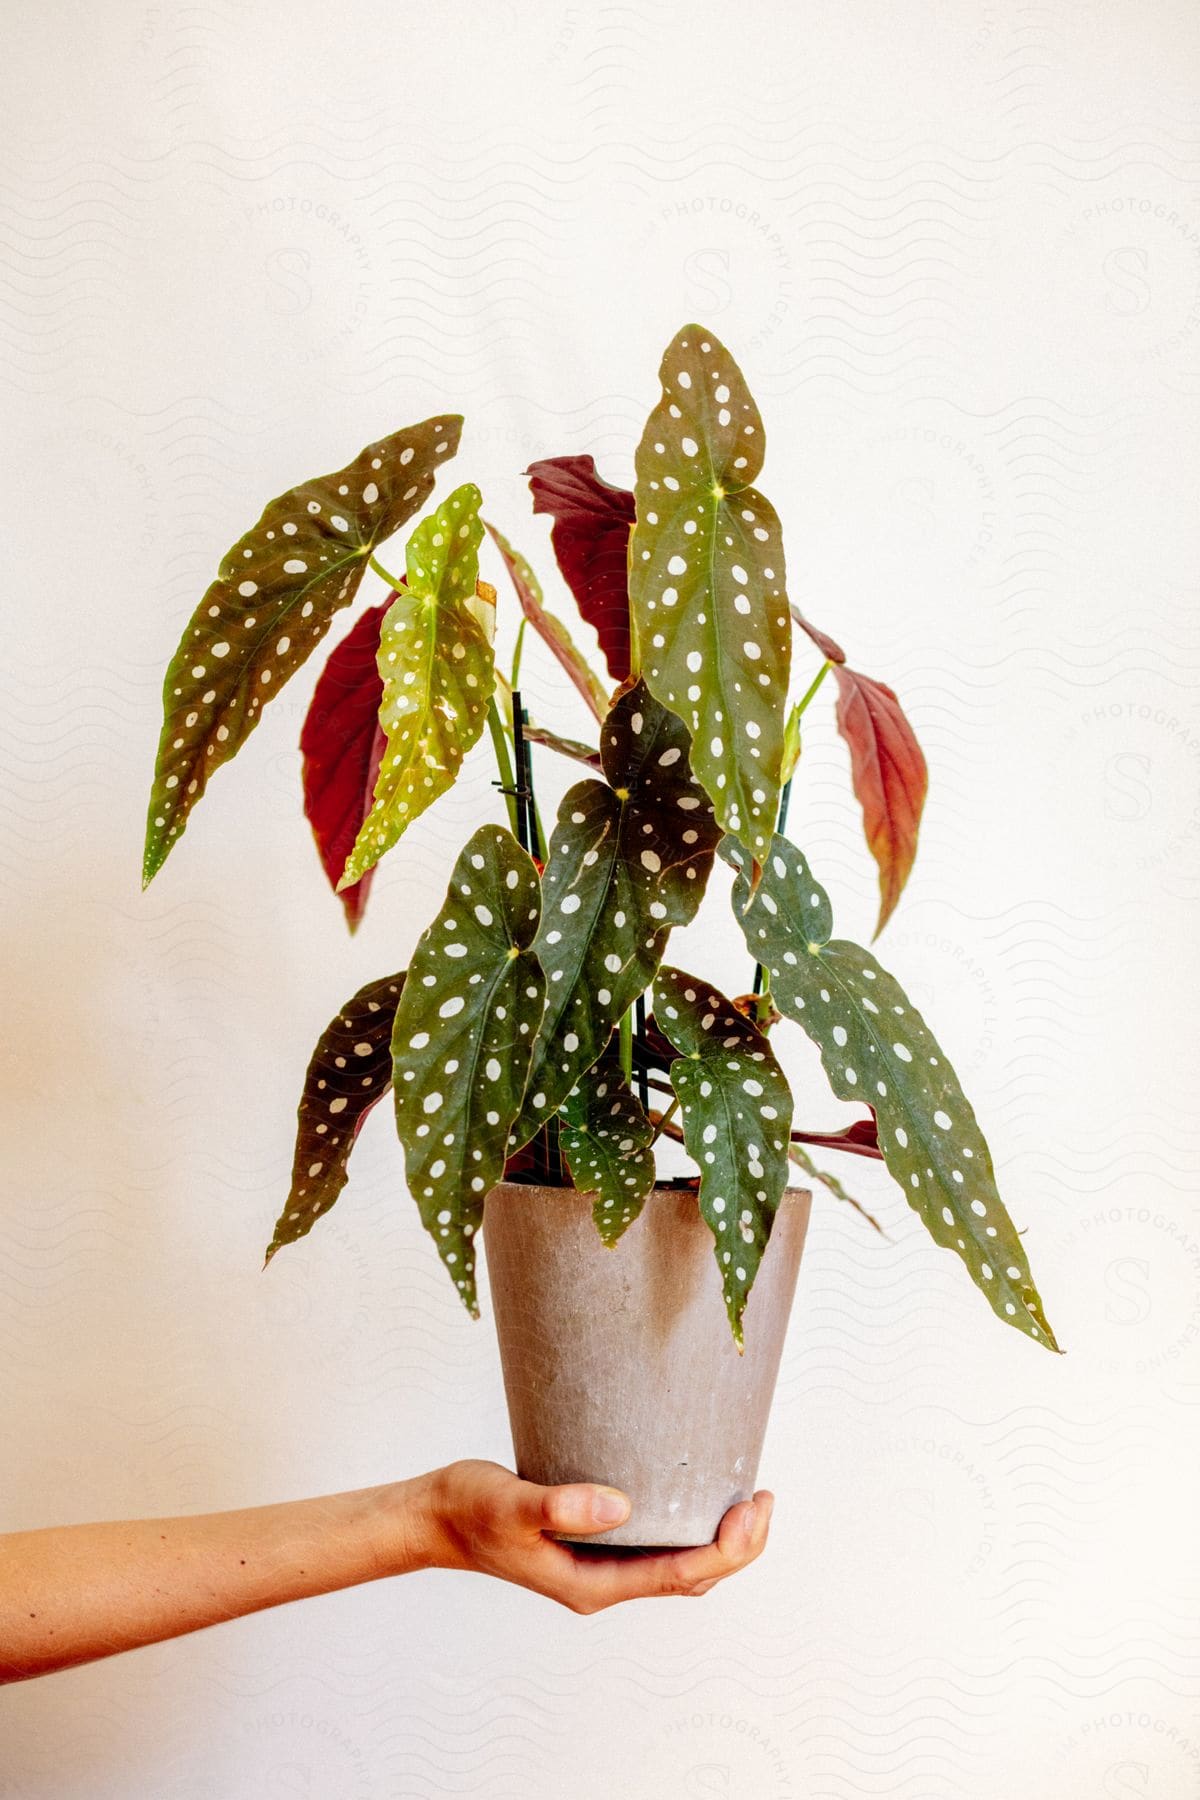 Hand holding potted plant with white wall in background